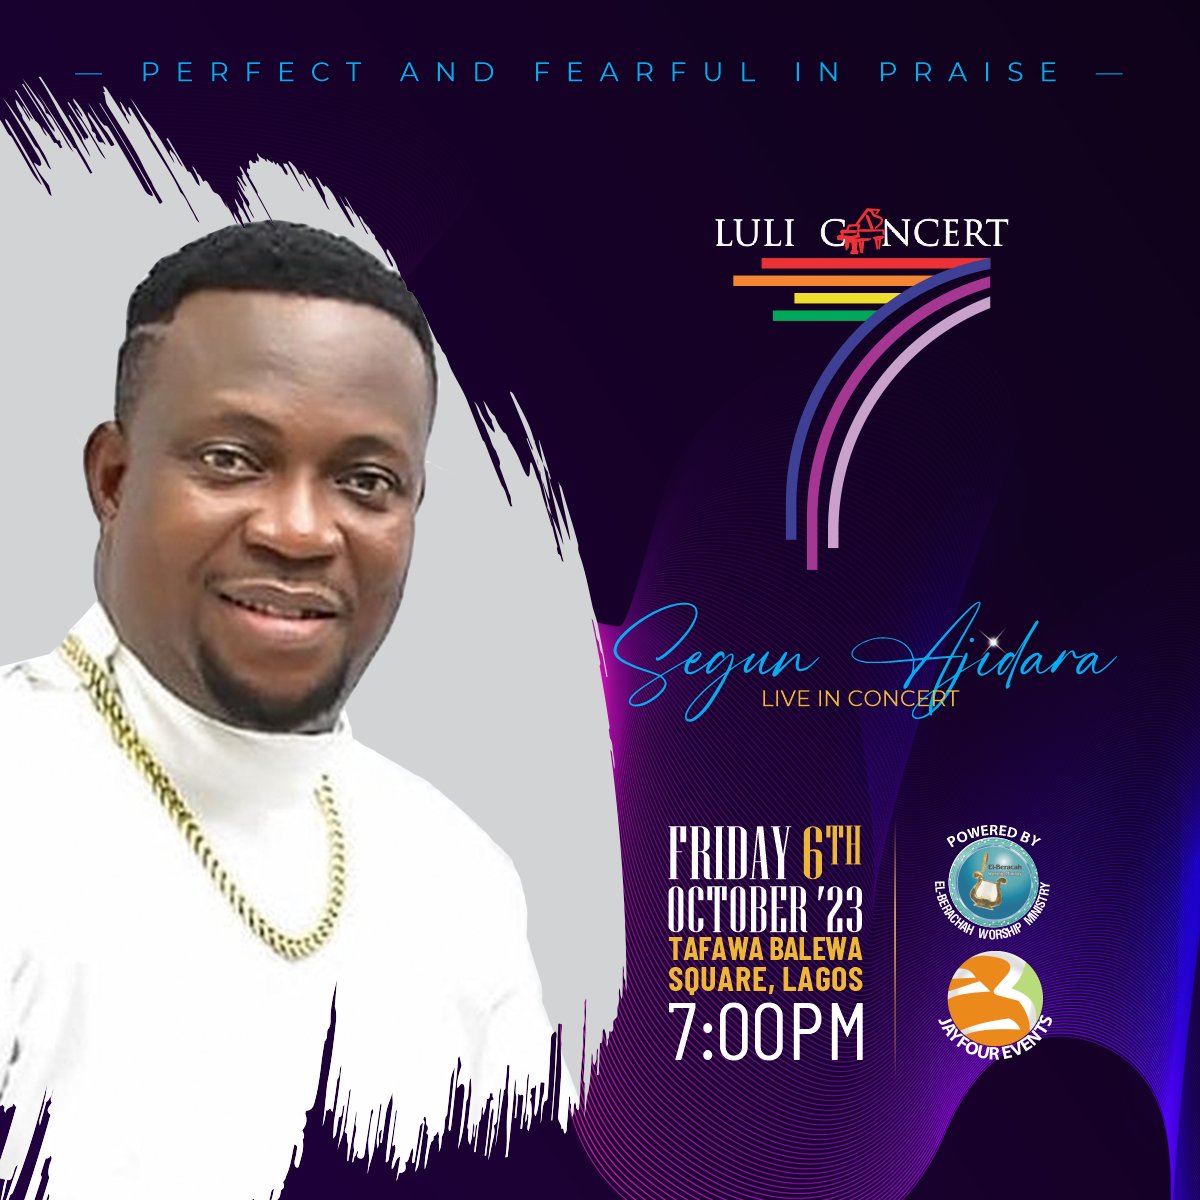 @segunajidara will minister at Luli Concert 2023. His third appearance is a testimony to his commitment to promoting gospel music within and outside the Celestial Church of Christ. 

#LC7 #luliconcert2023 #luliconcert #celestialchurchofchrist #celeclassics #concert